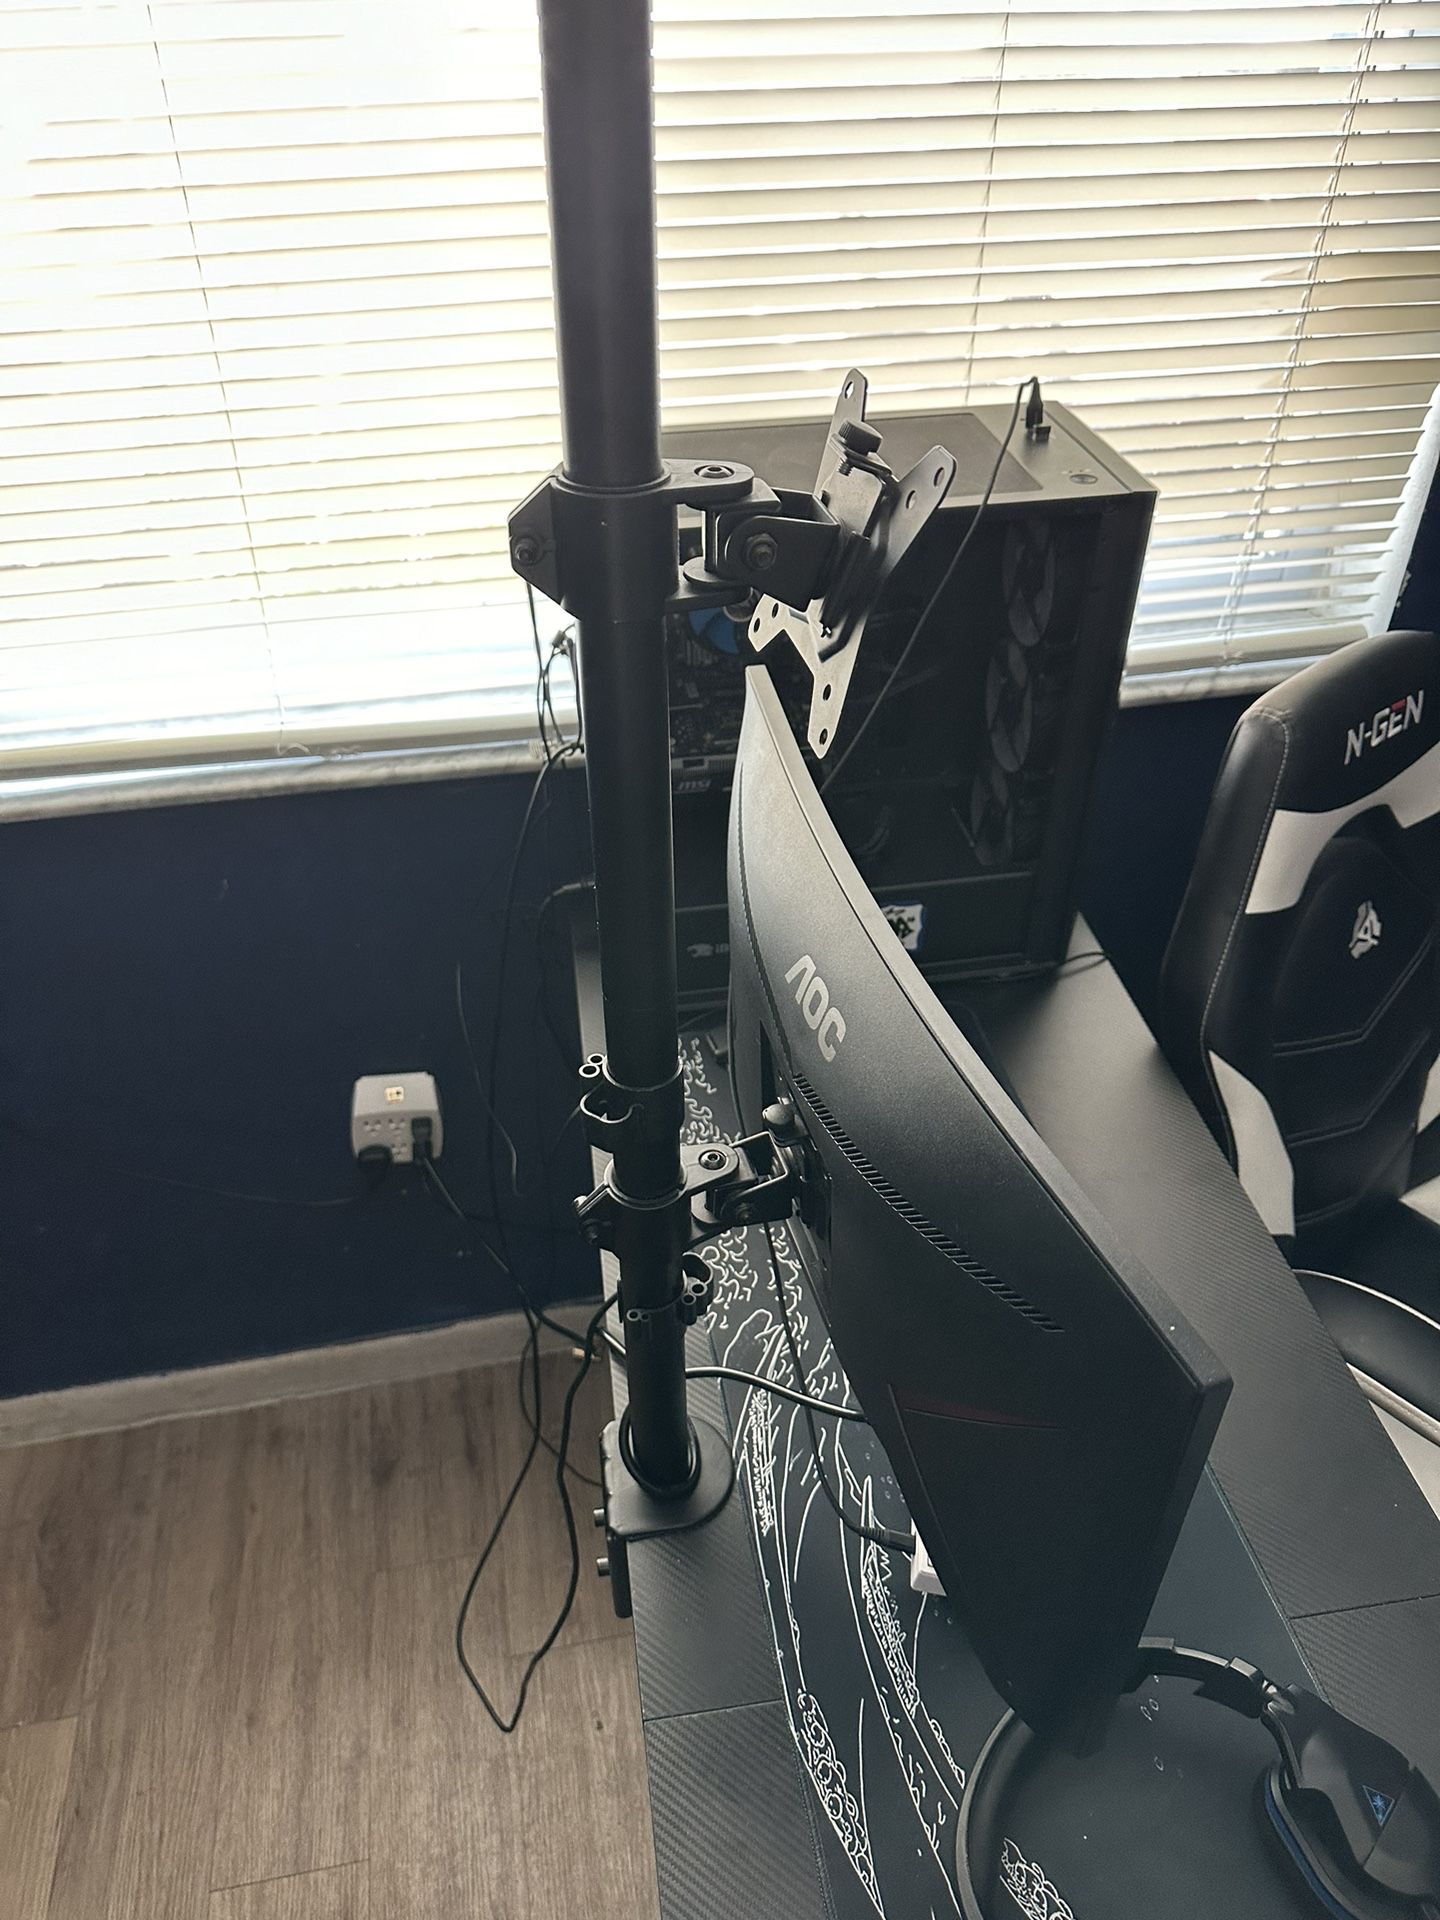 Curved AOC Gaming Monitor With Mount